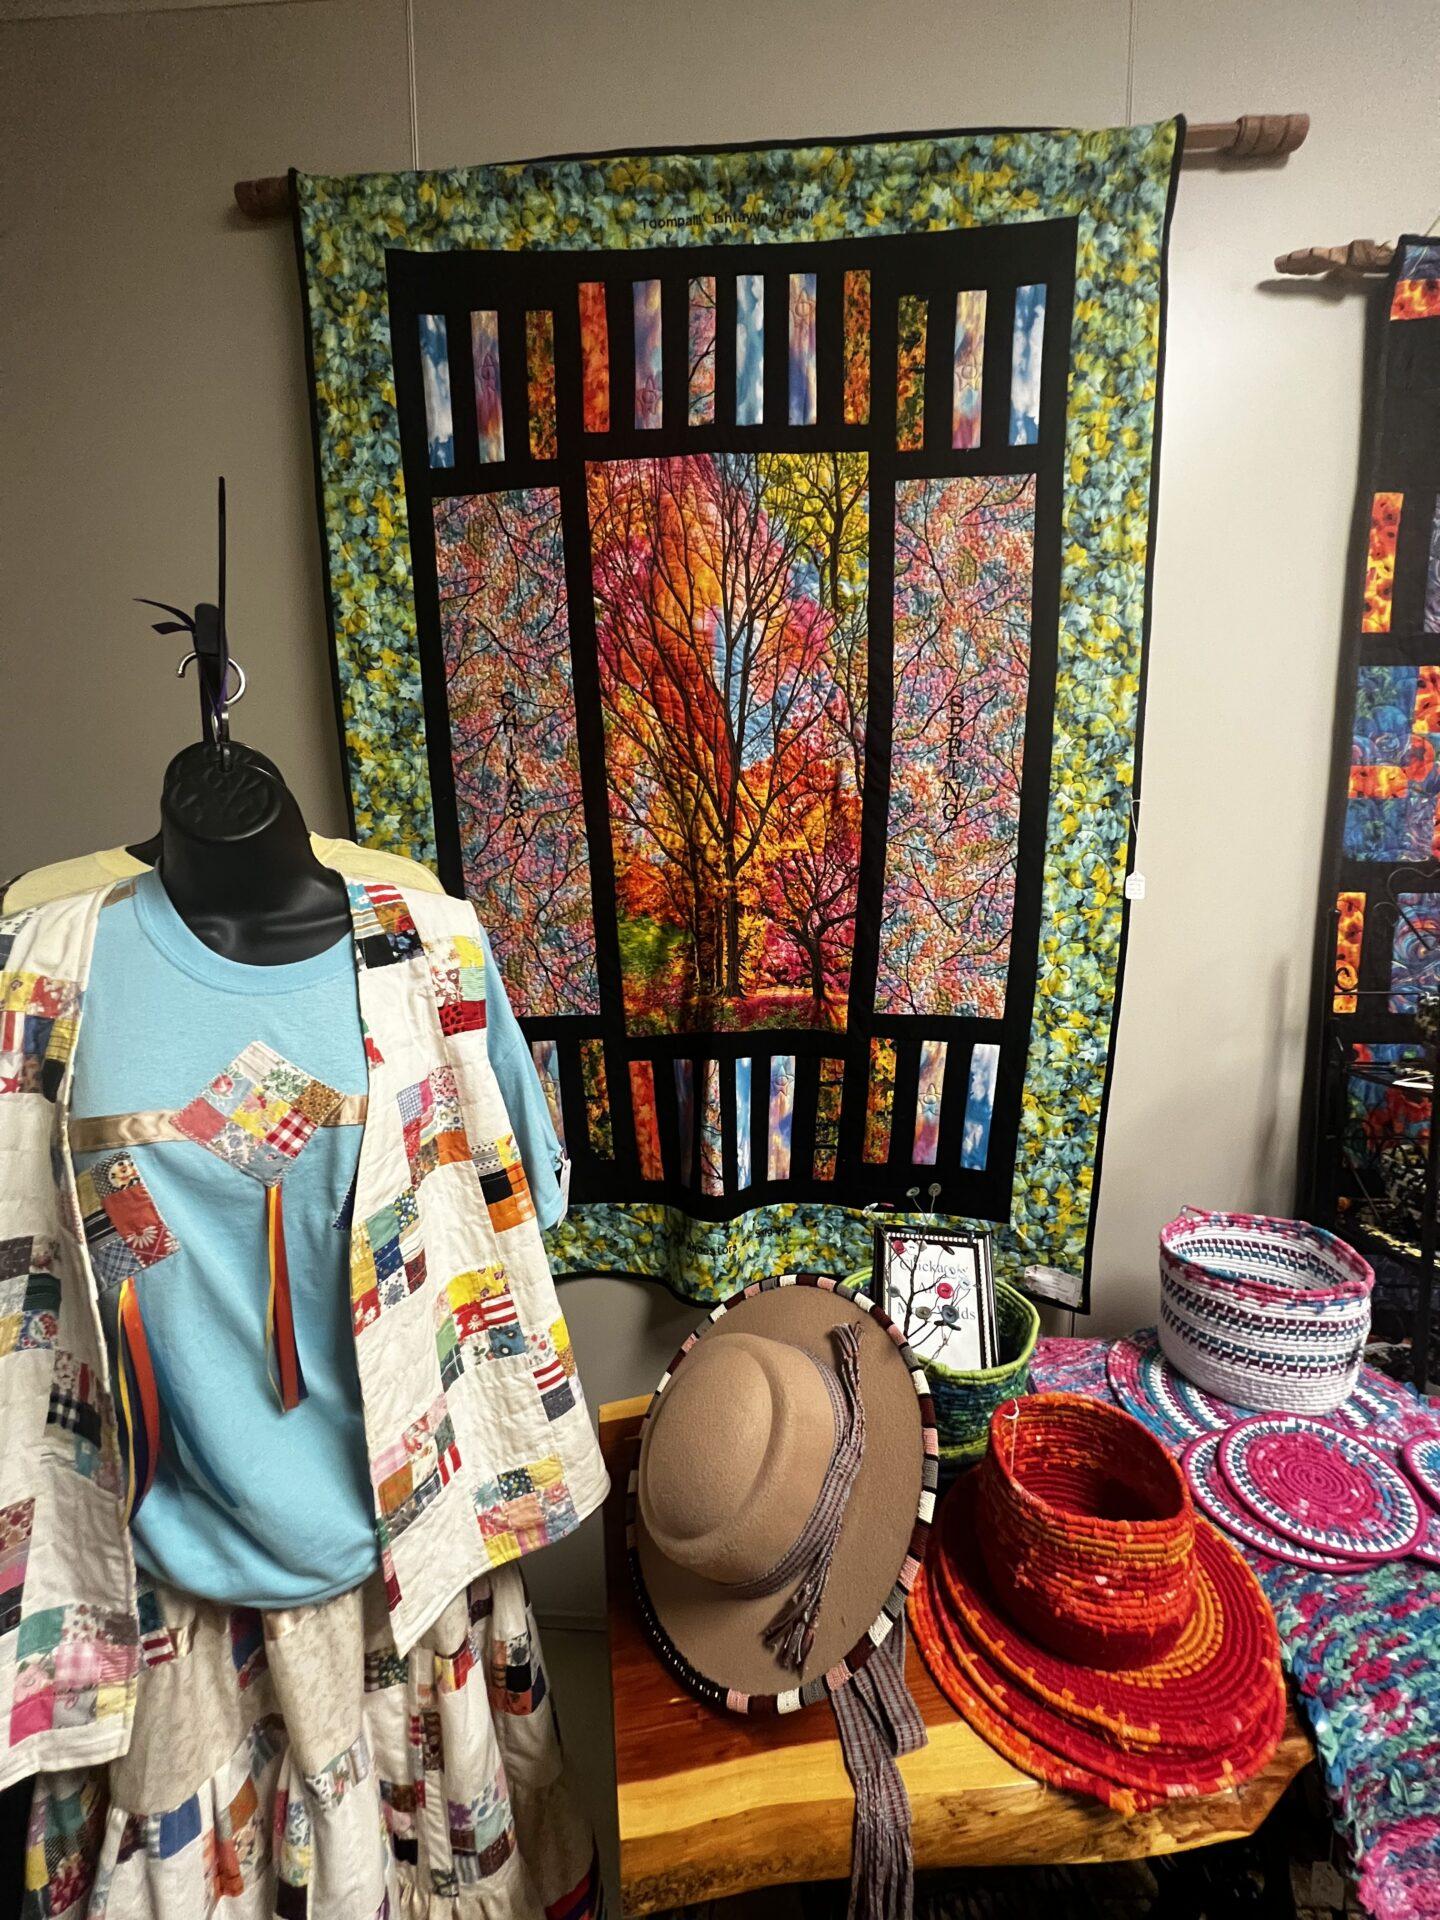 Hanging quilt and art on display